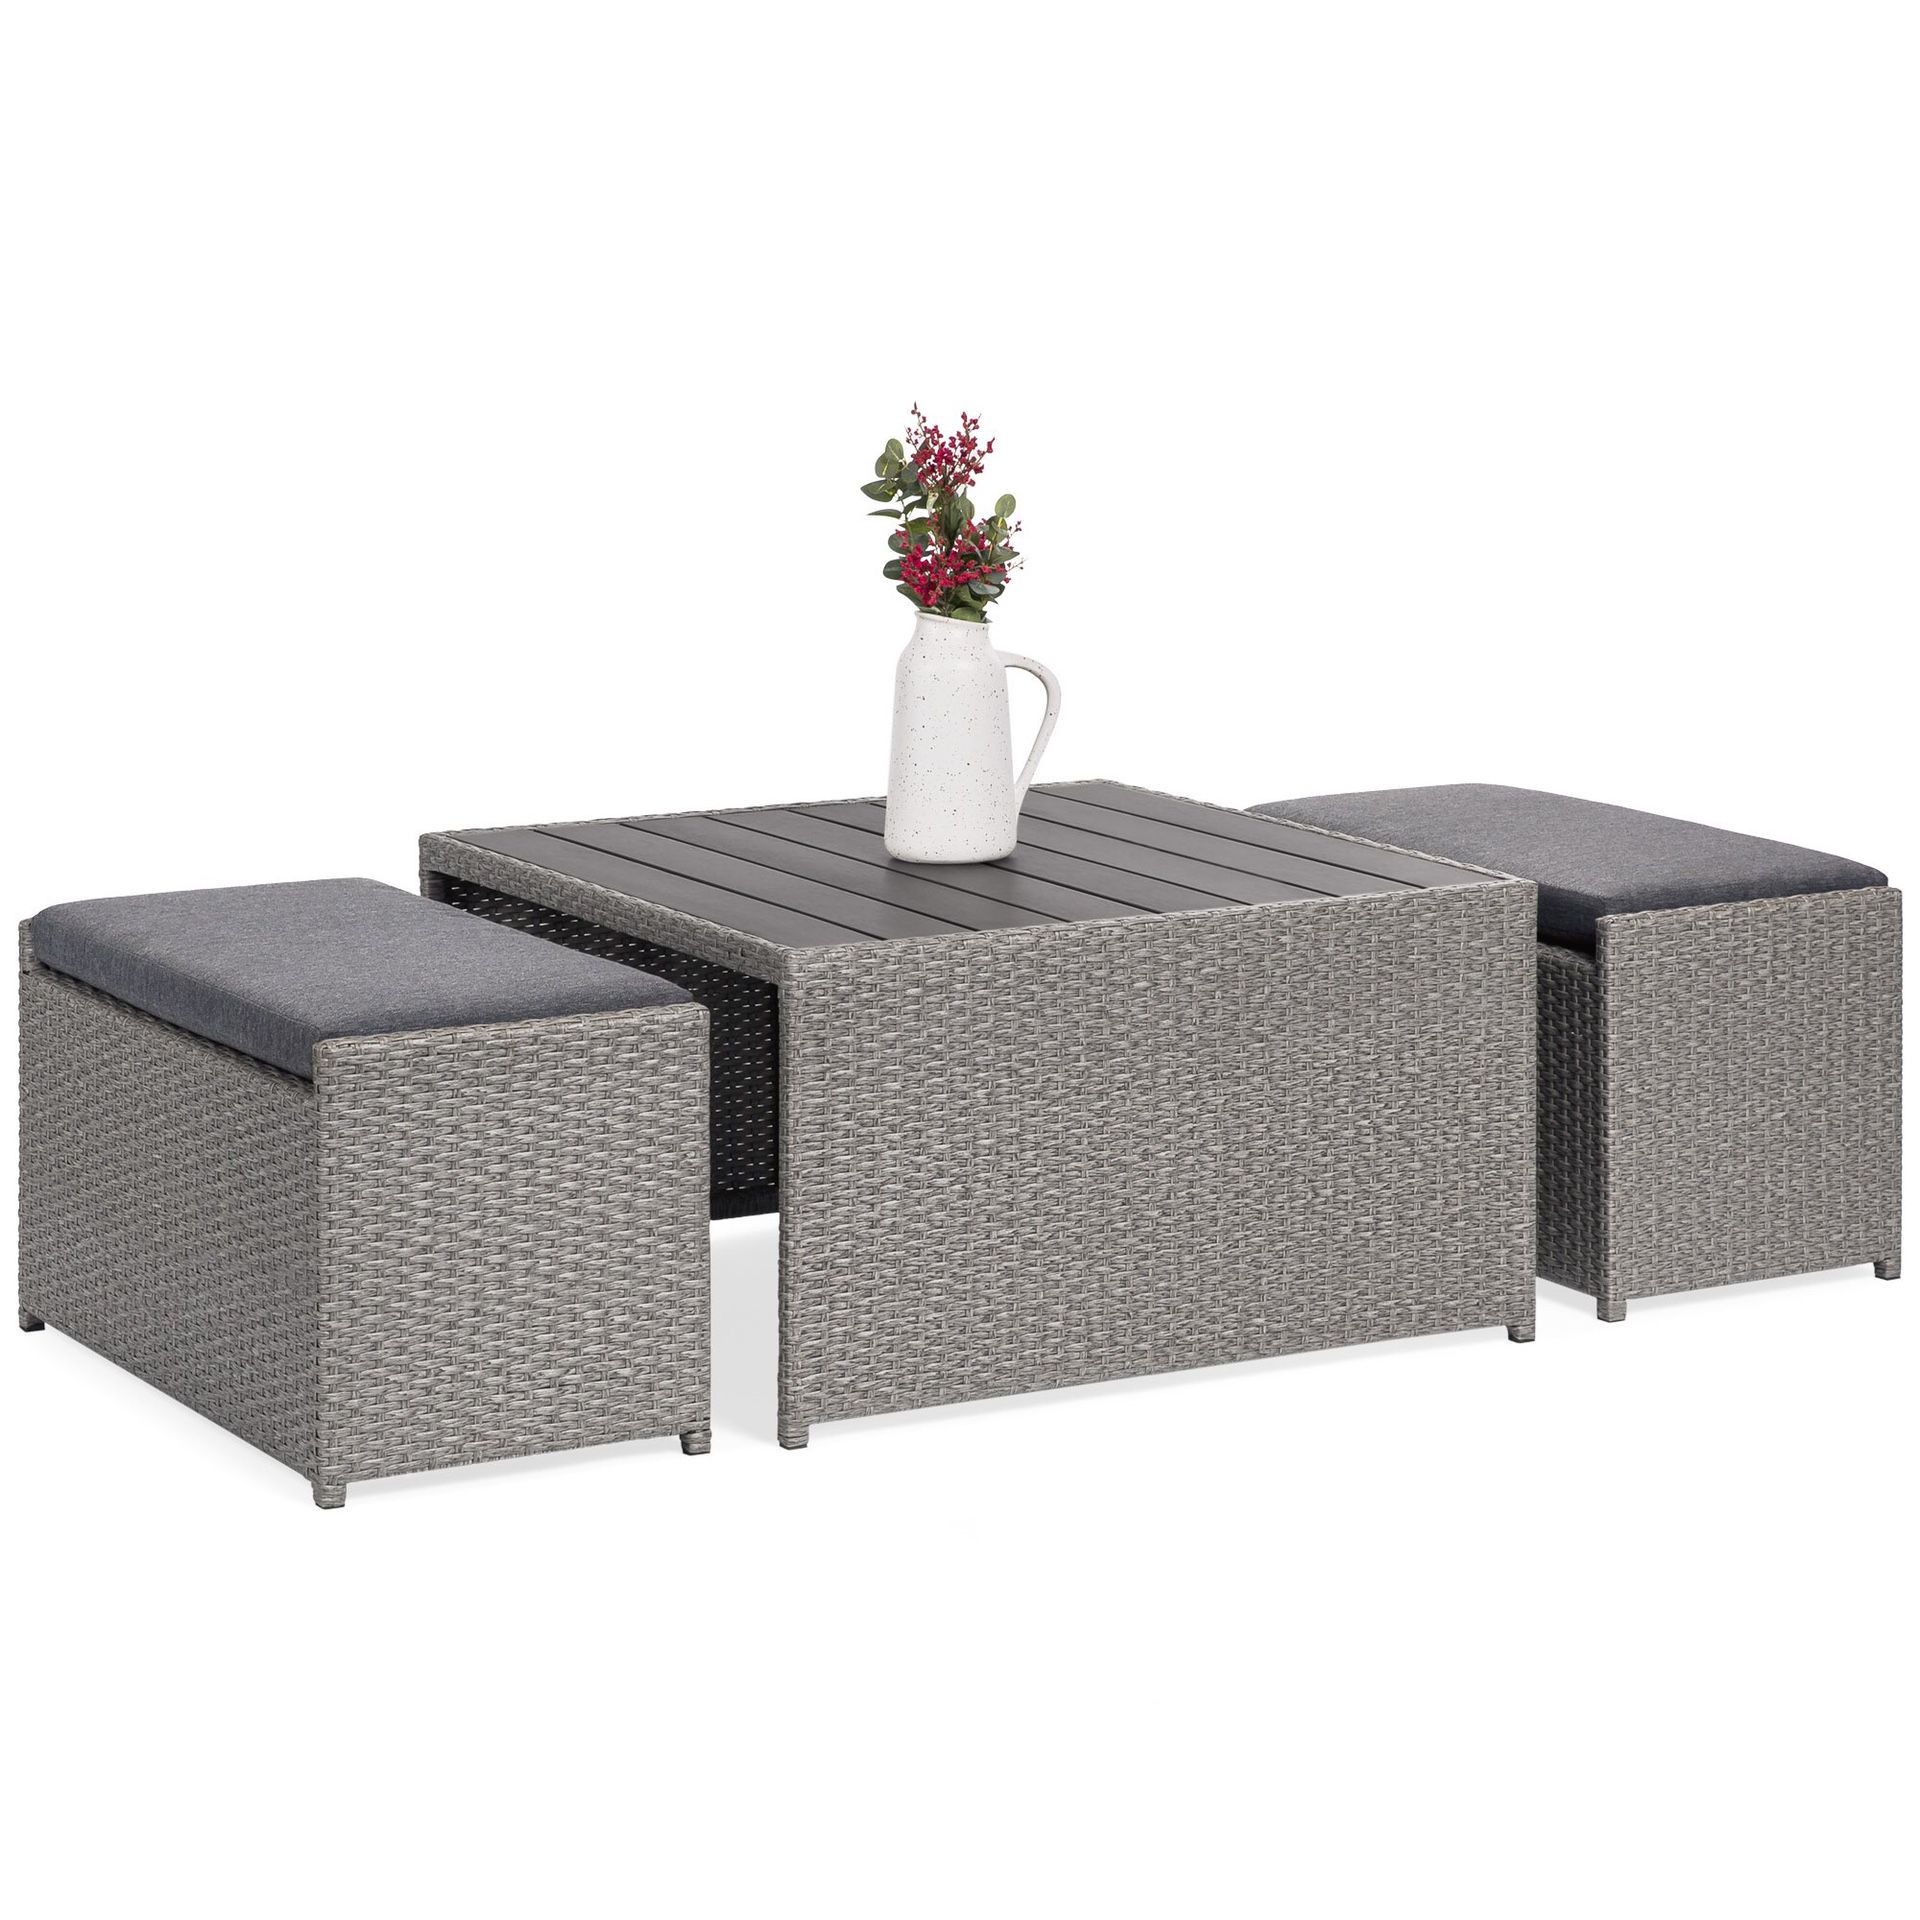 NEW Table and 2 Ottoman Set Outdoor Modern